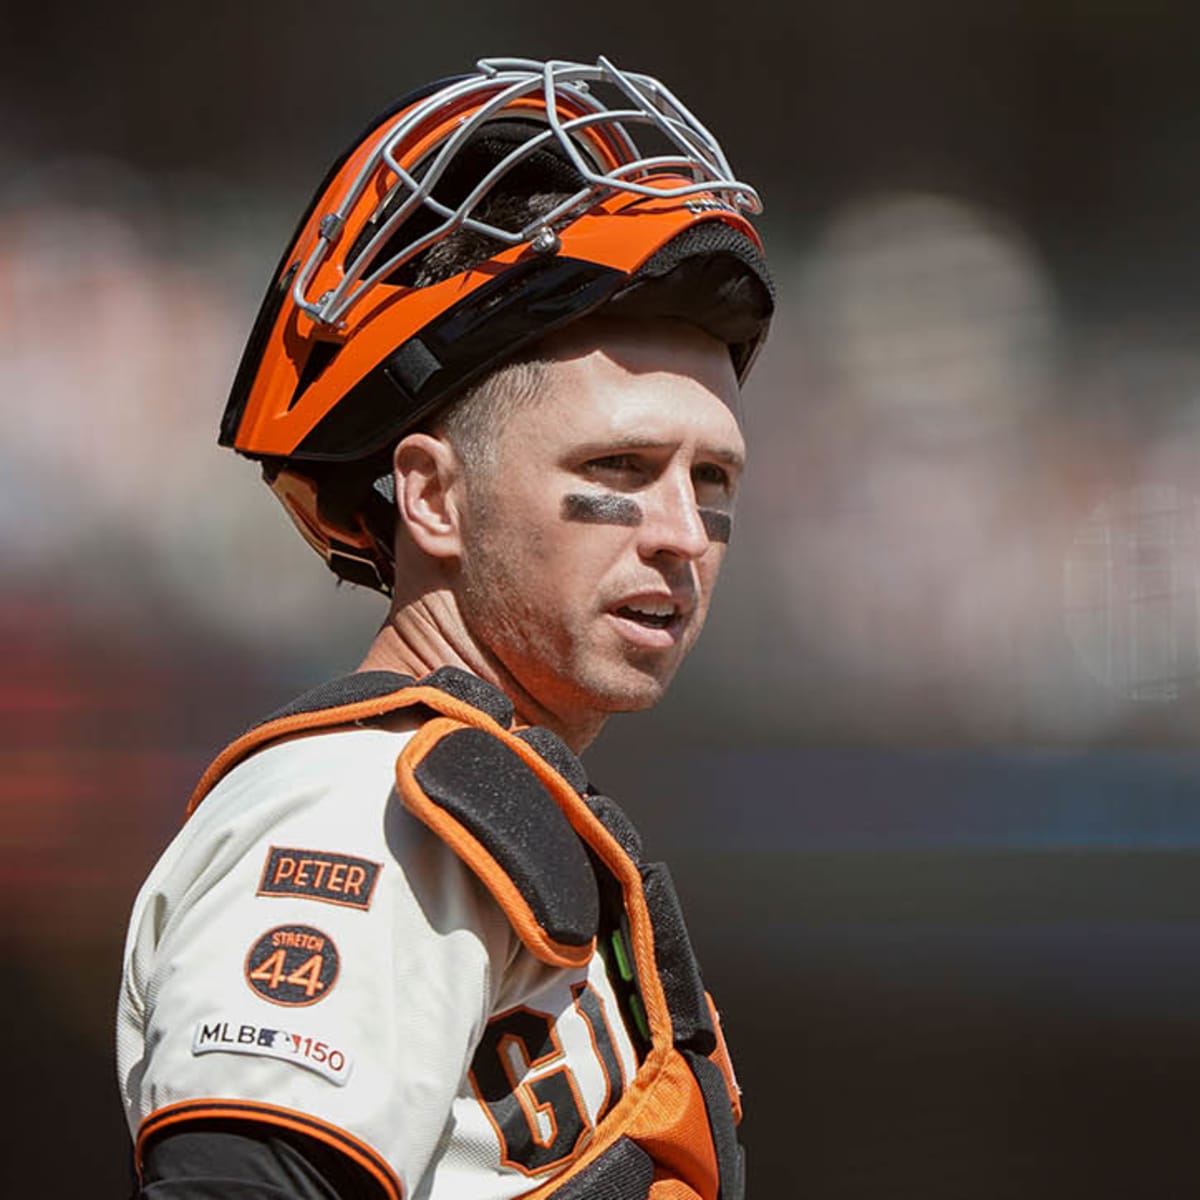 Giants' superstar catcher Buster Posey to retire